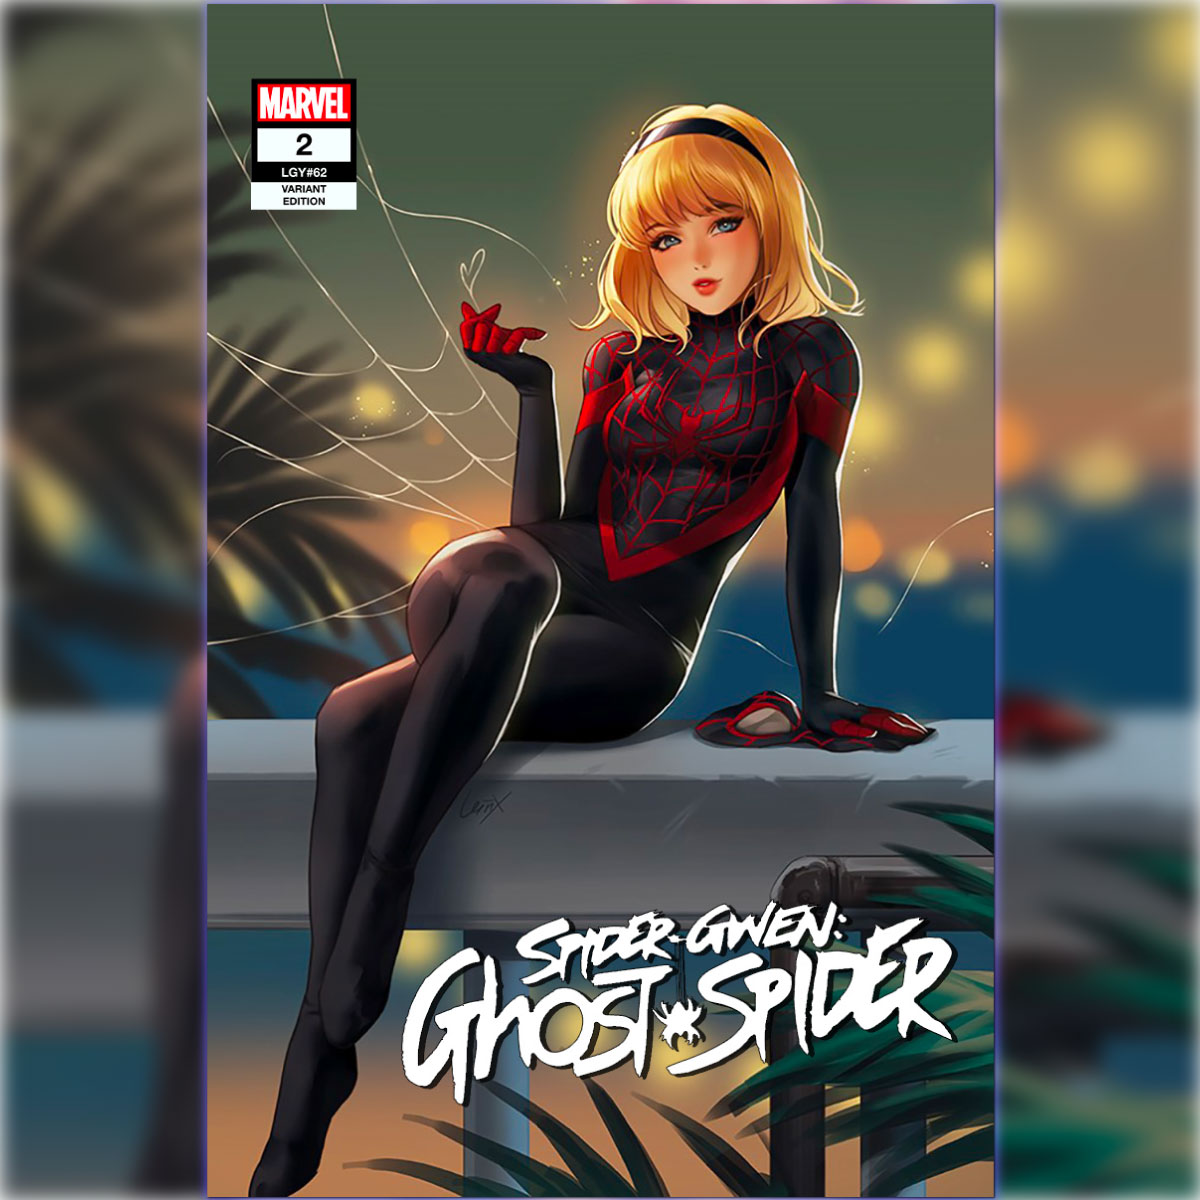 Heads up, True Believers!  Pre-orders for the exclusive Spider-Gwen Ghost-Spider #2 with Leirix's cover art (featuring Gwen in Miles' suit!) start 5 PM CST on 5/15! Don't miss out: UnknownComicBooks.com #SpiderGwen #ExclusiveCover #PreOrderNow #UnknownComics